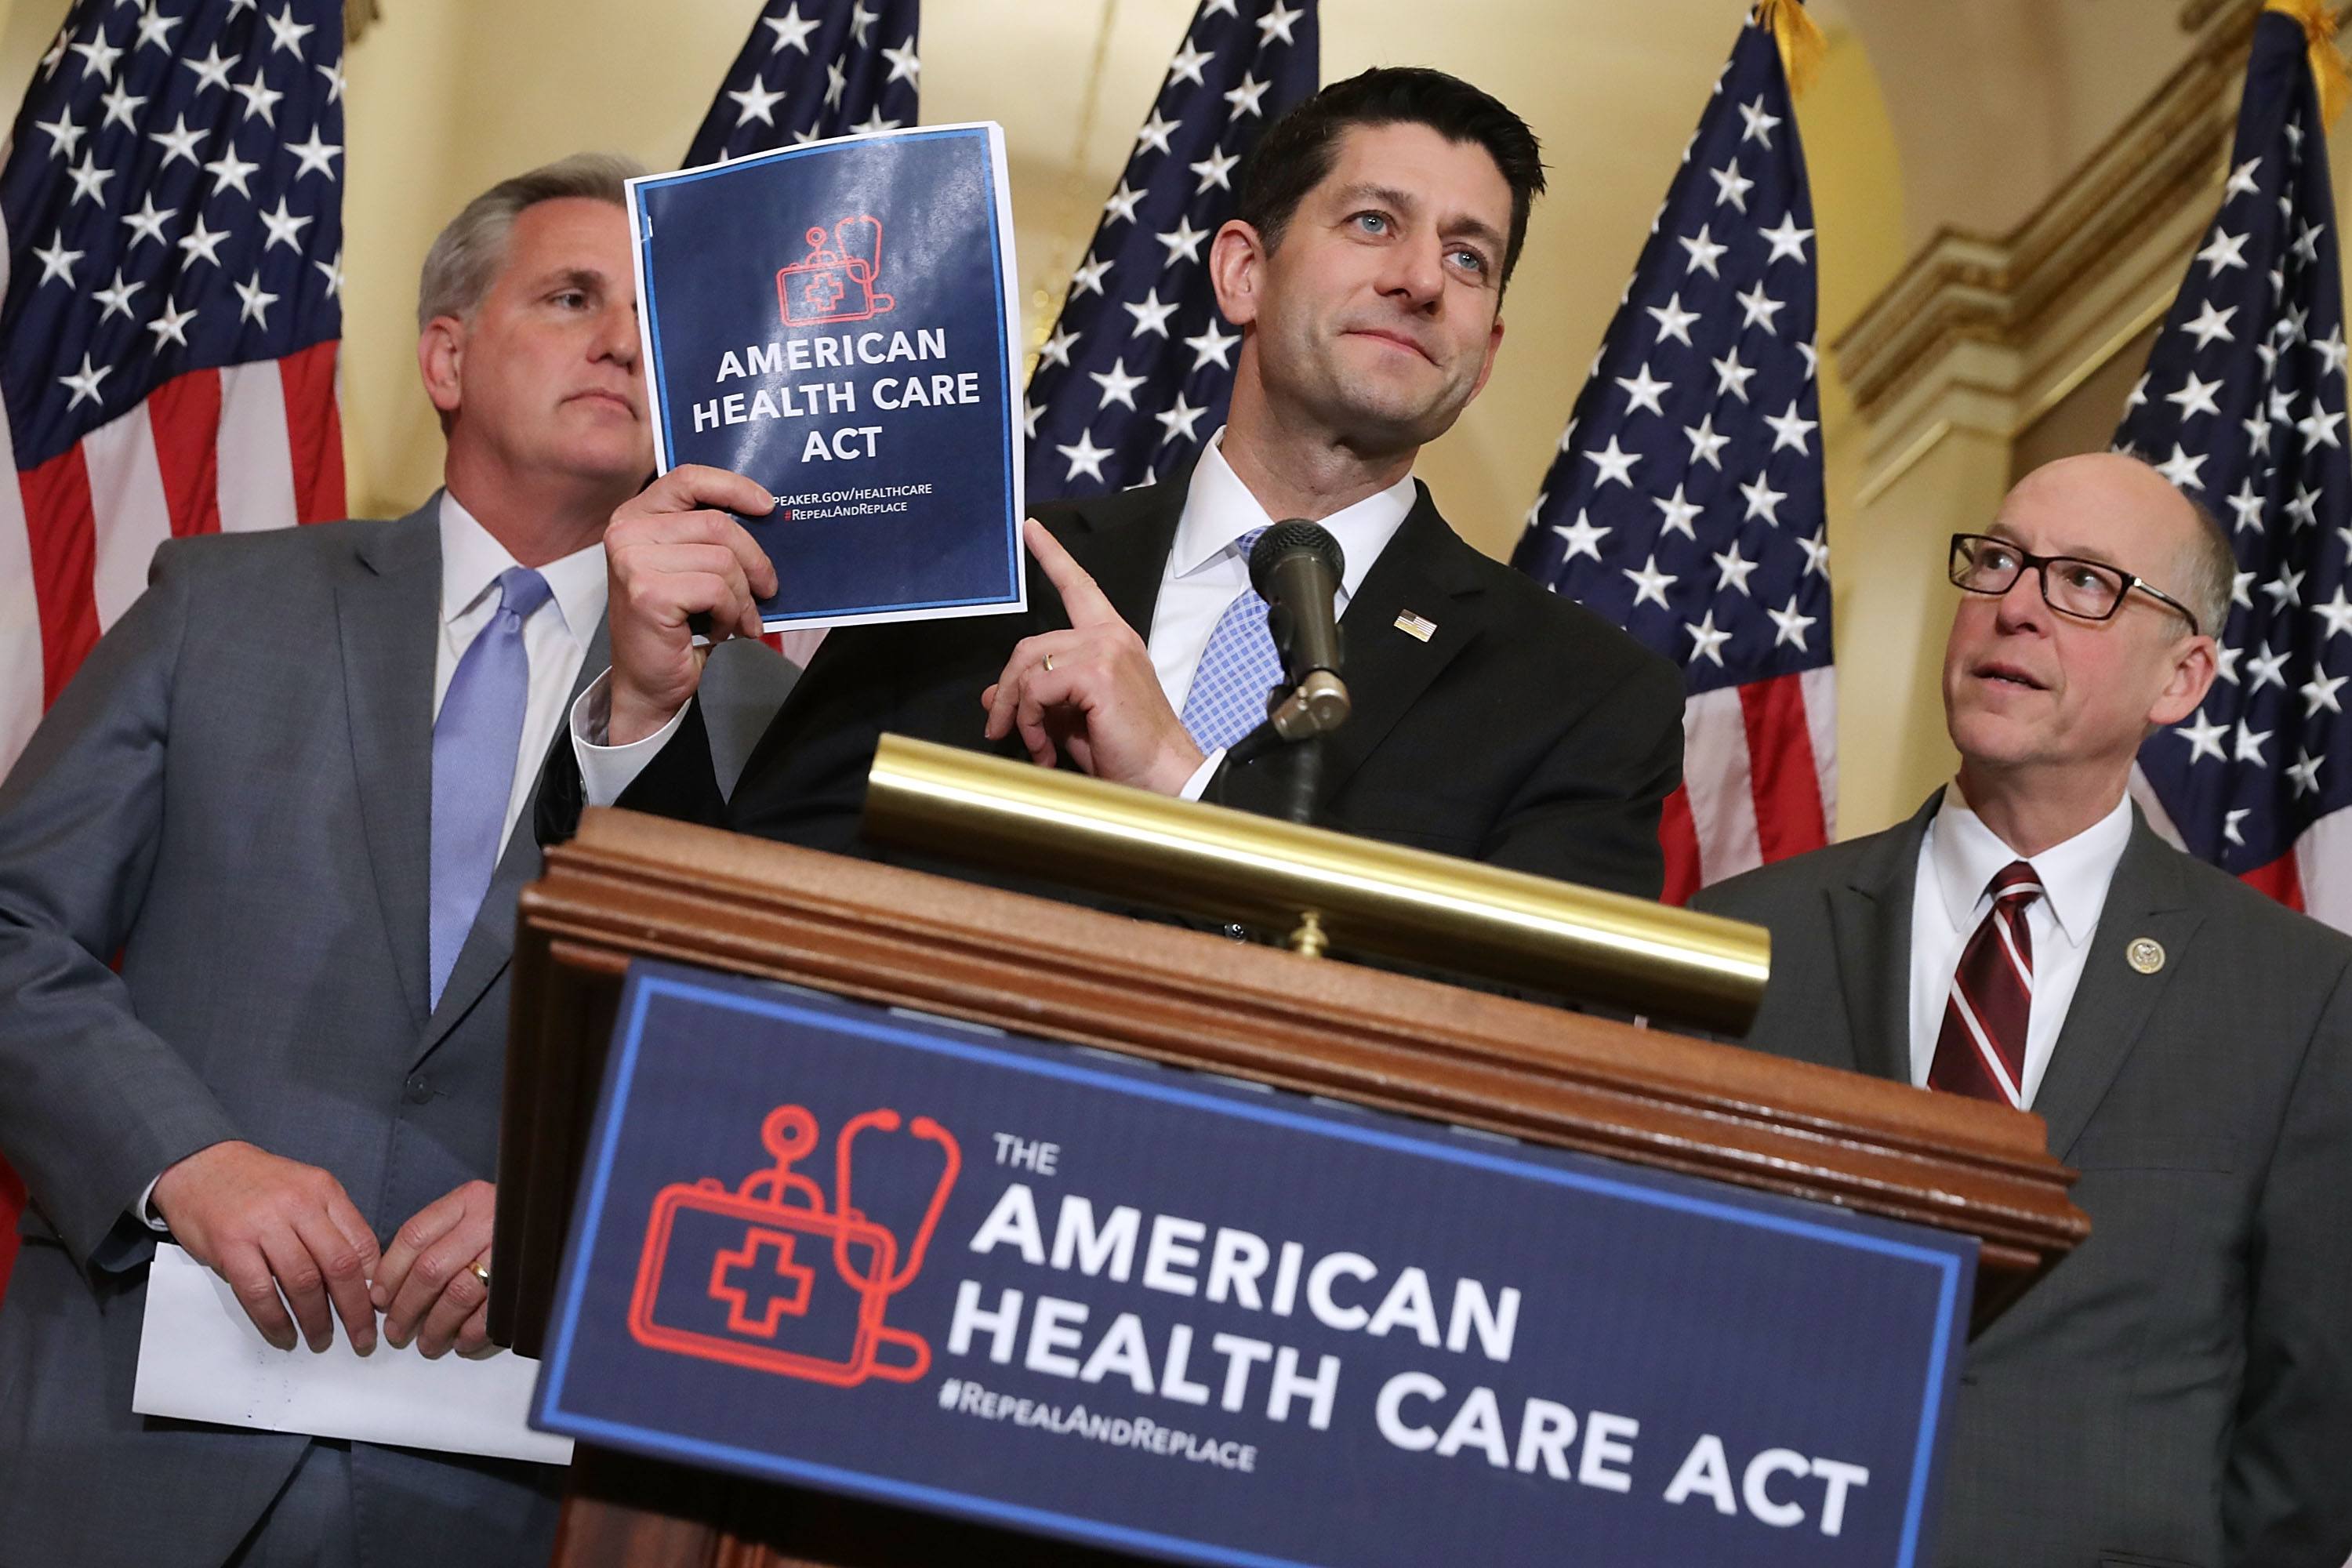 Paul Ryan speaking at a podium on the American Healthcare Act